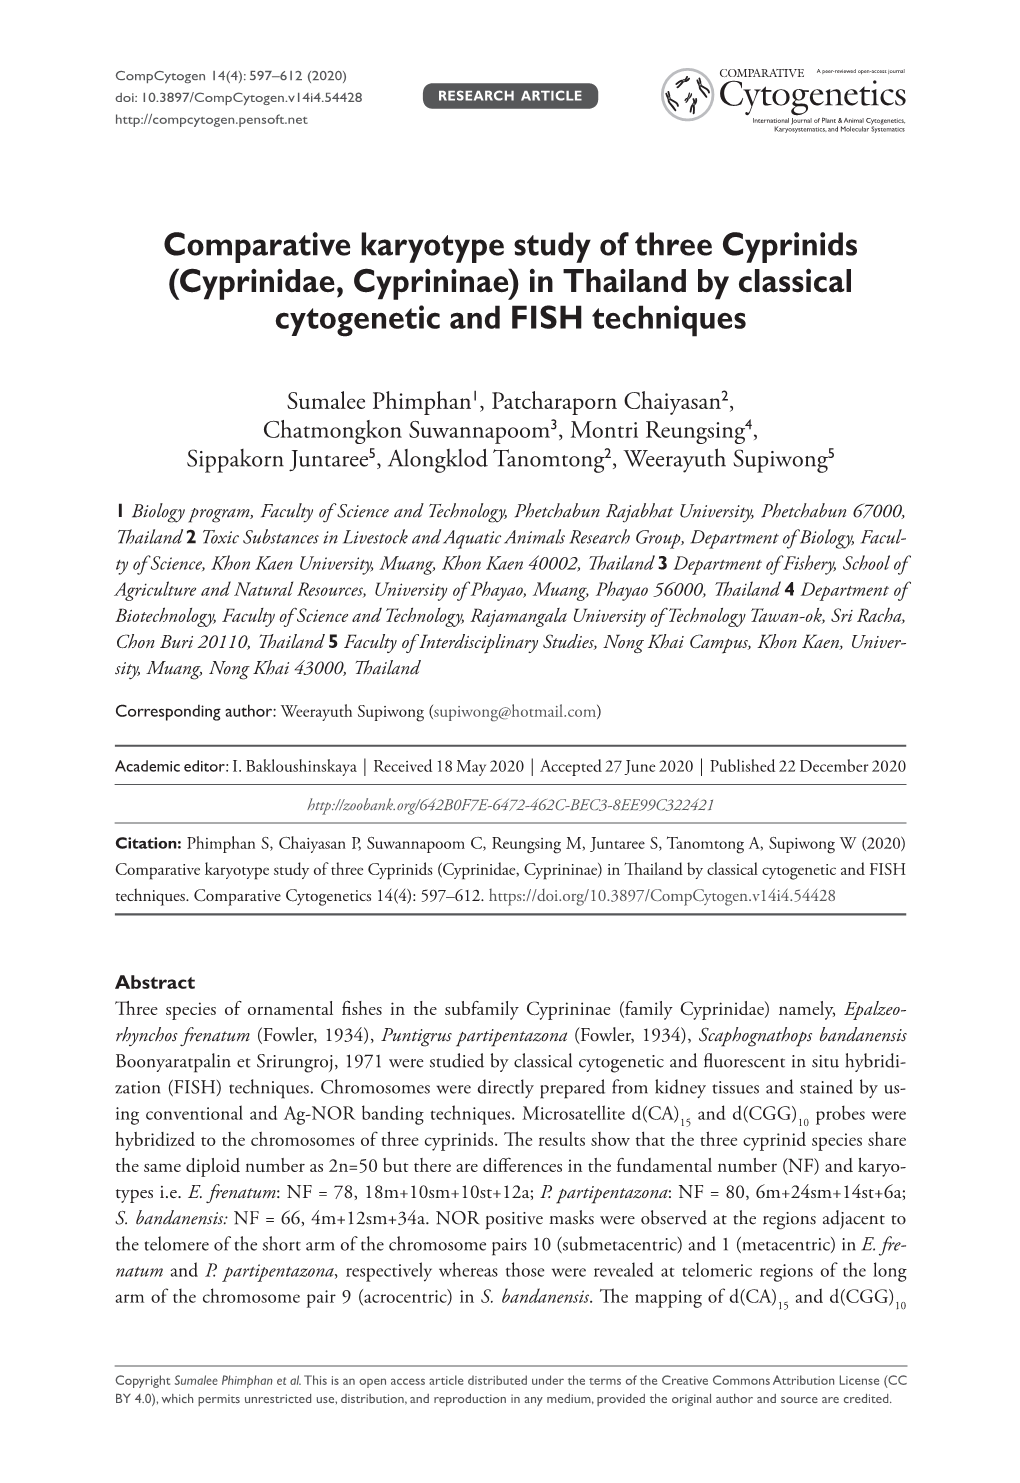 Comparative Karyotype Study of Three Cyprinids (Cyprinidae, Cyprininae) in Thailand by Classical Cytogenetic and FISH Techniques